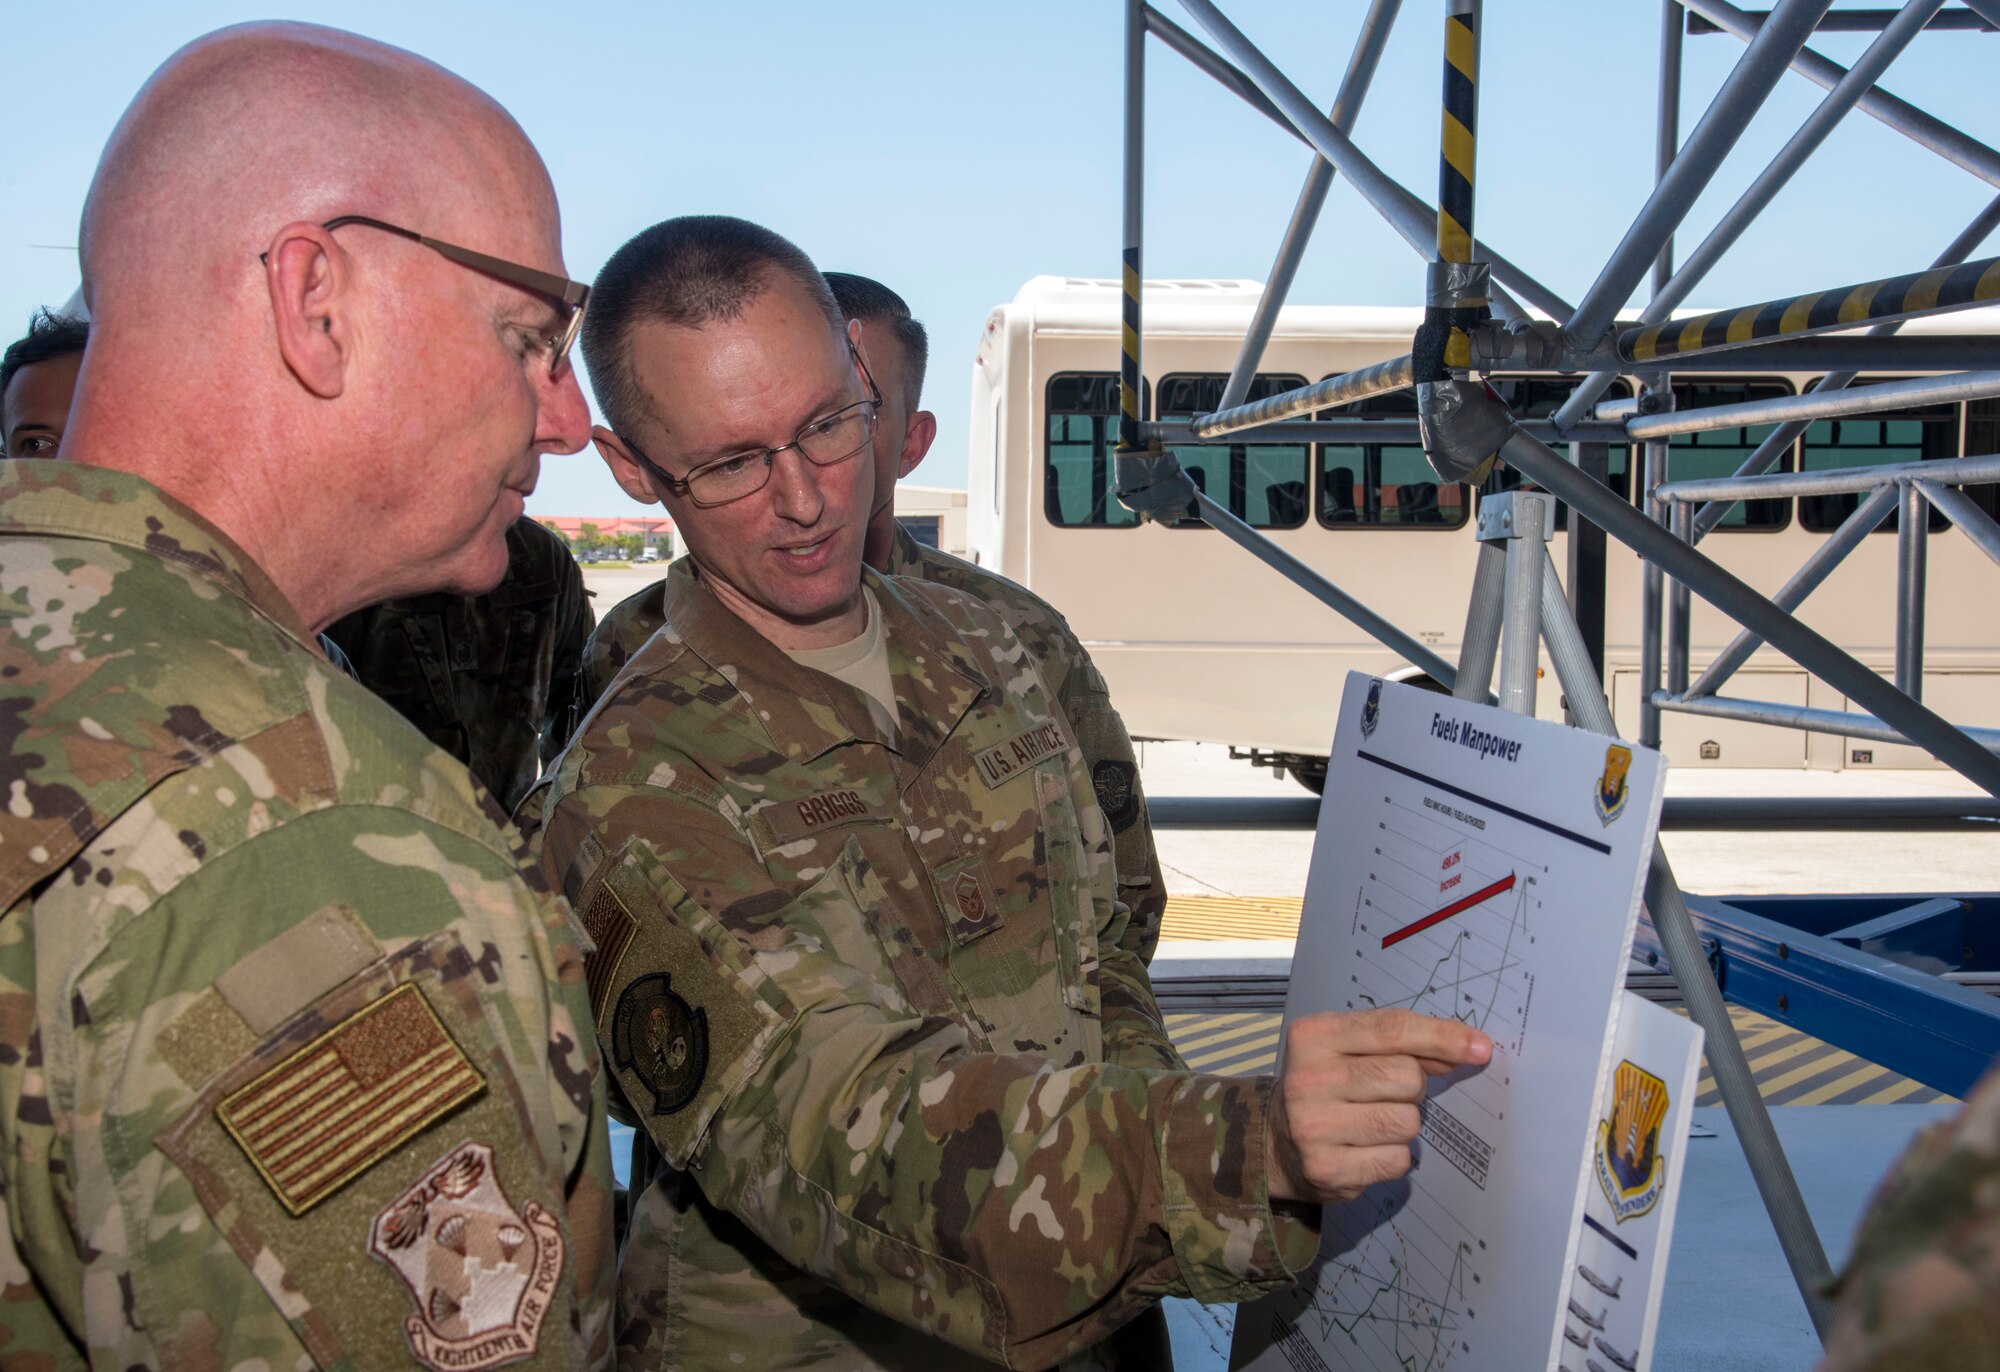 U.S. Air Force Maj. Gen. Sam Barrett, the 18th Air Force Commander from Scott Air Force Base, Ill., listens to a fuels manpower presentation by U.S. Air Force Master Sgt. Ryan Griggs, the 6th Maintenance Squadron accessories flight chief, at MacDill AFB, Fla., May 7, 2019.